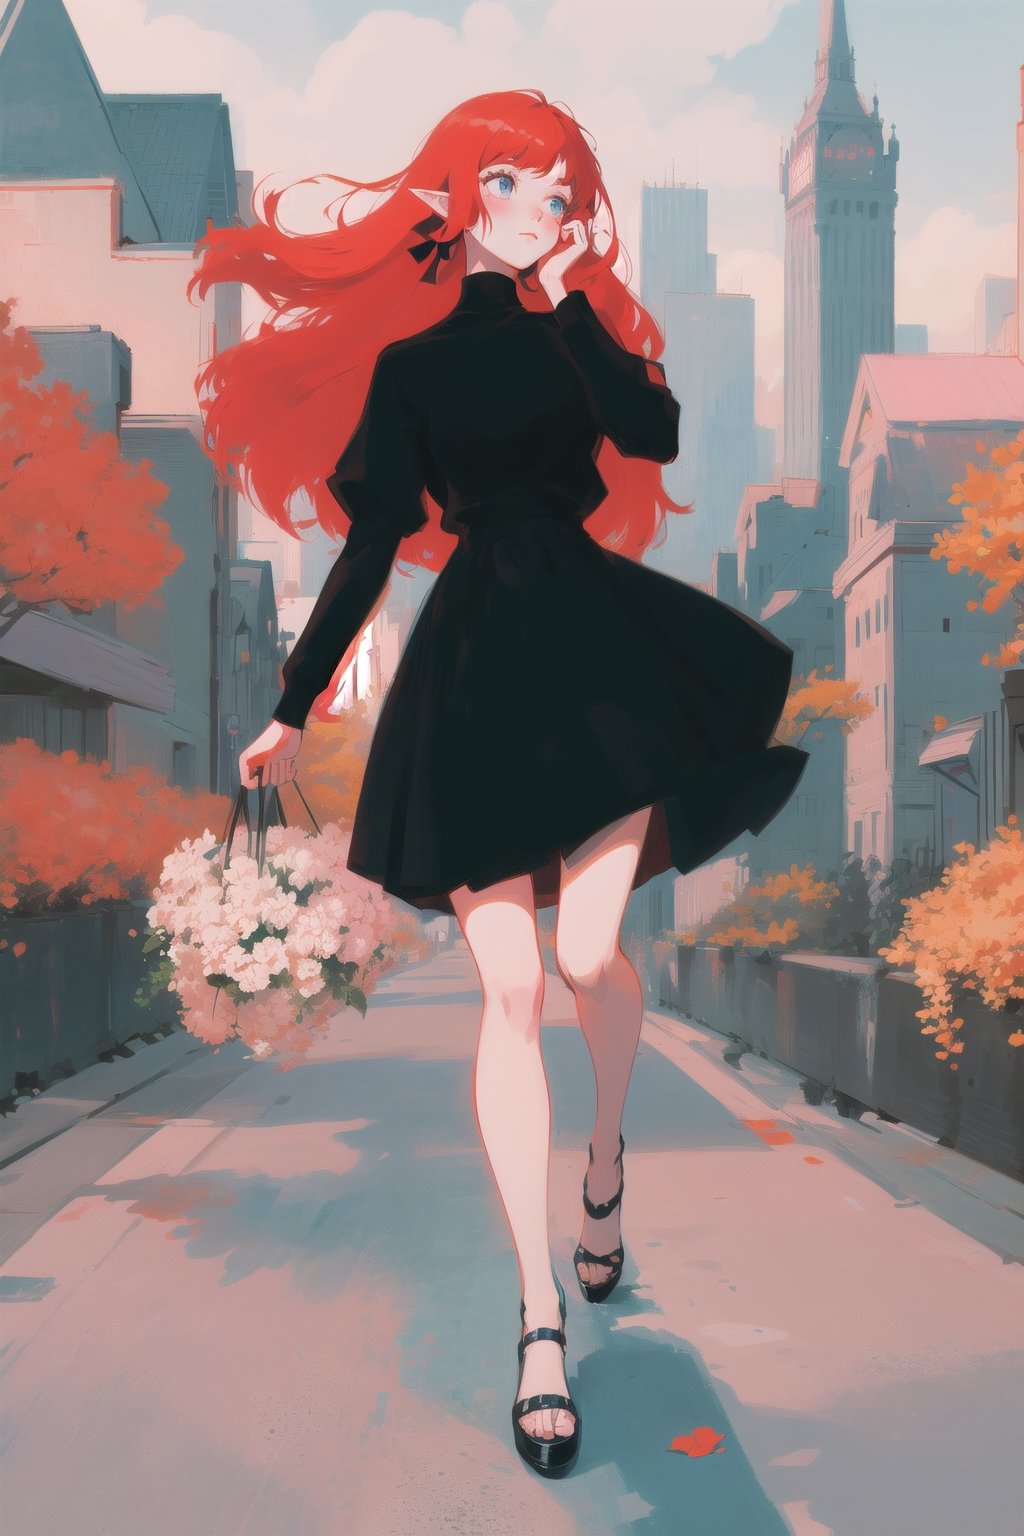 Beautiful girl holding flower, elf, red hair, cool angle, beautiful art, dynamic, pinterest art, full body, cute, cool angle, city, nice color palette, cityscape, asphalt